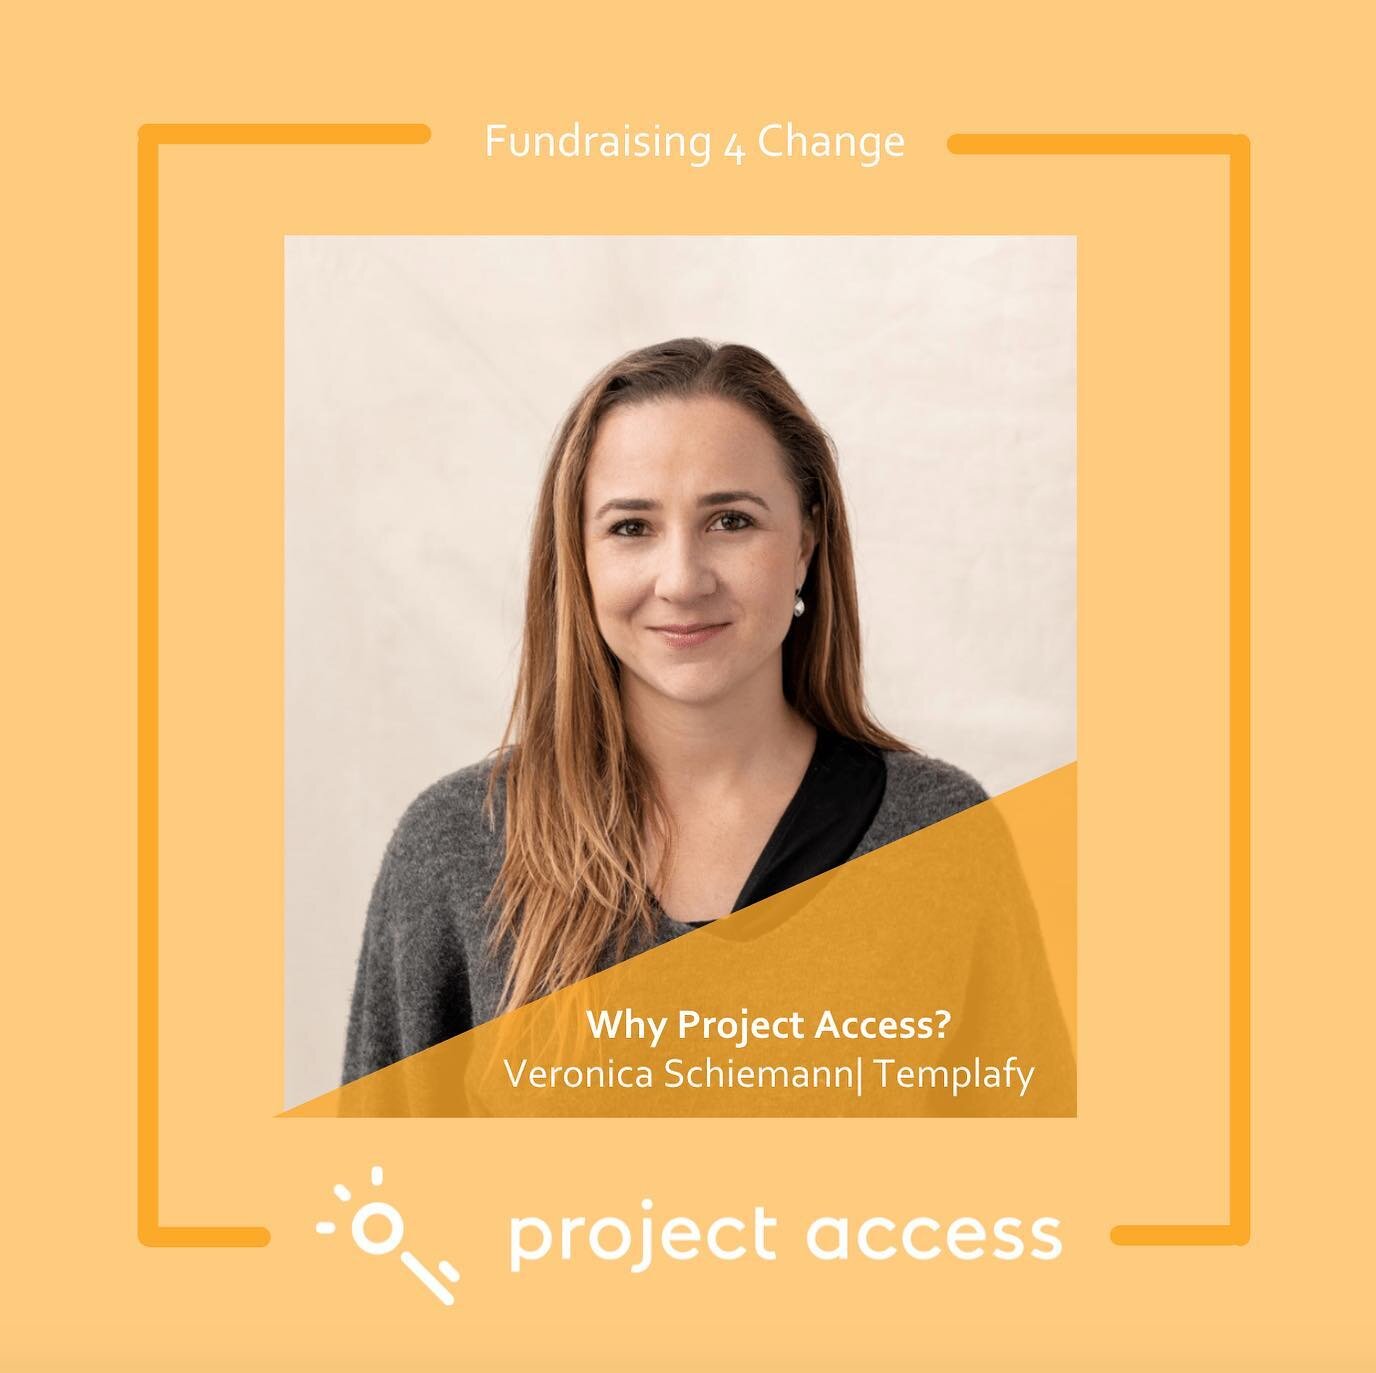 When I think of&nbsp;Project Access, I think of the words opportunity and freedom&rsquo;. 🧡Veronica from our partner, Templafy, supports Project Access because she wants to see impactful change in the World. Project Access is the perfect solution to